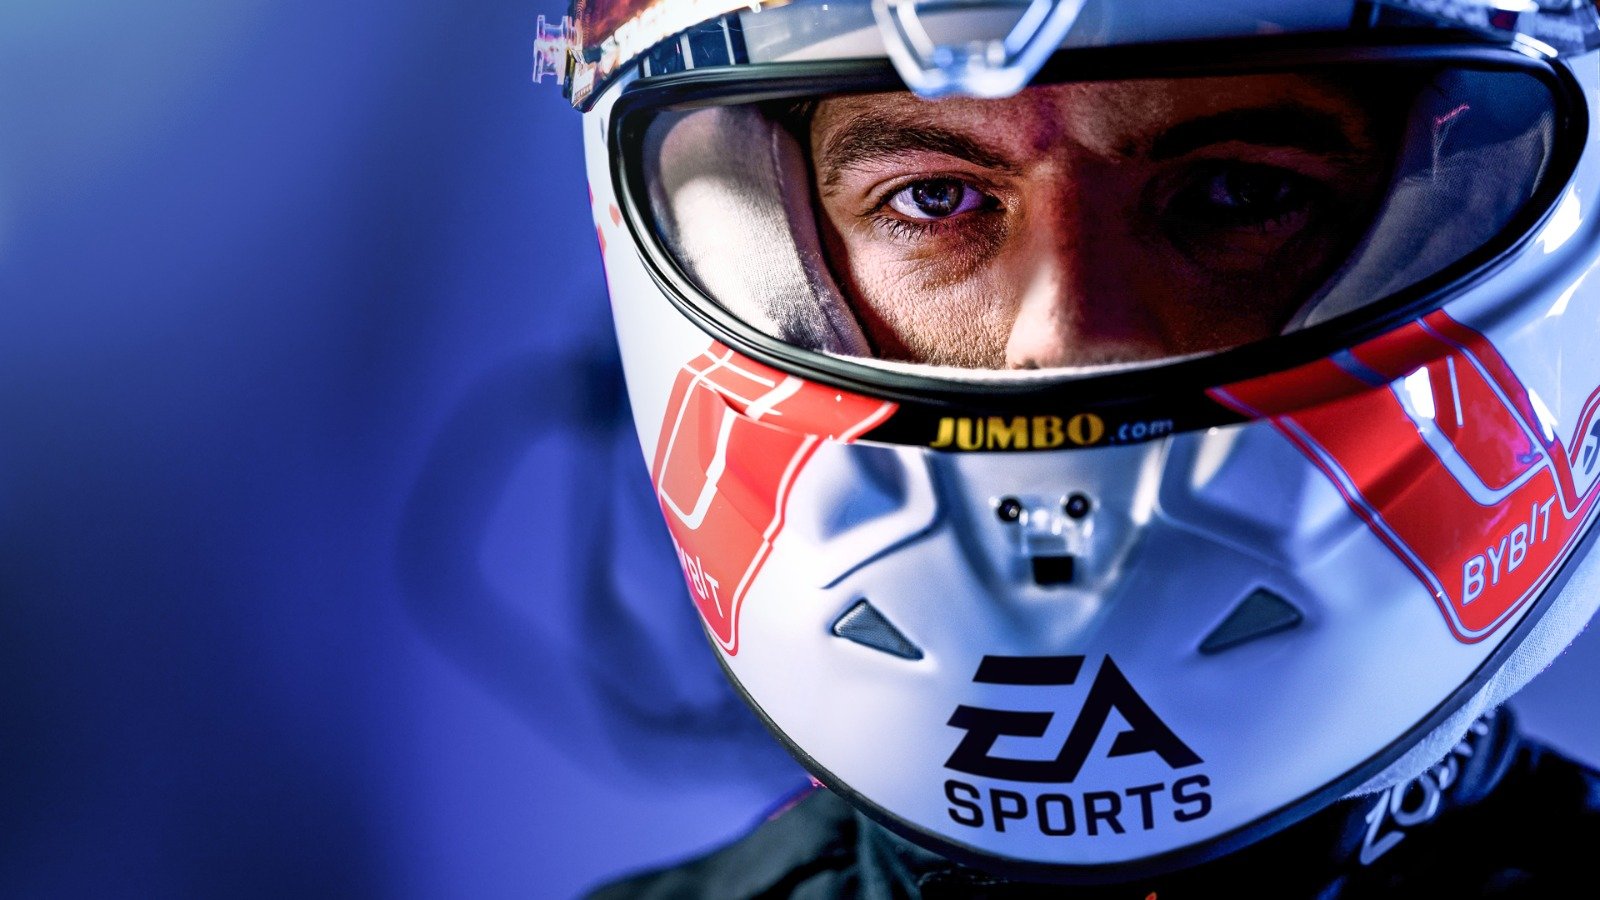 F1 23 is seemingly teasing the return of the Braking Point story mode | VGC